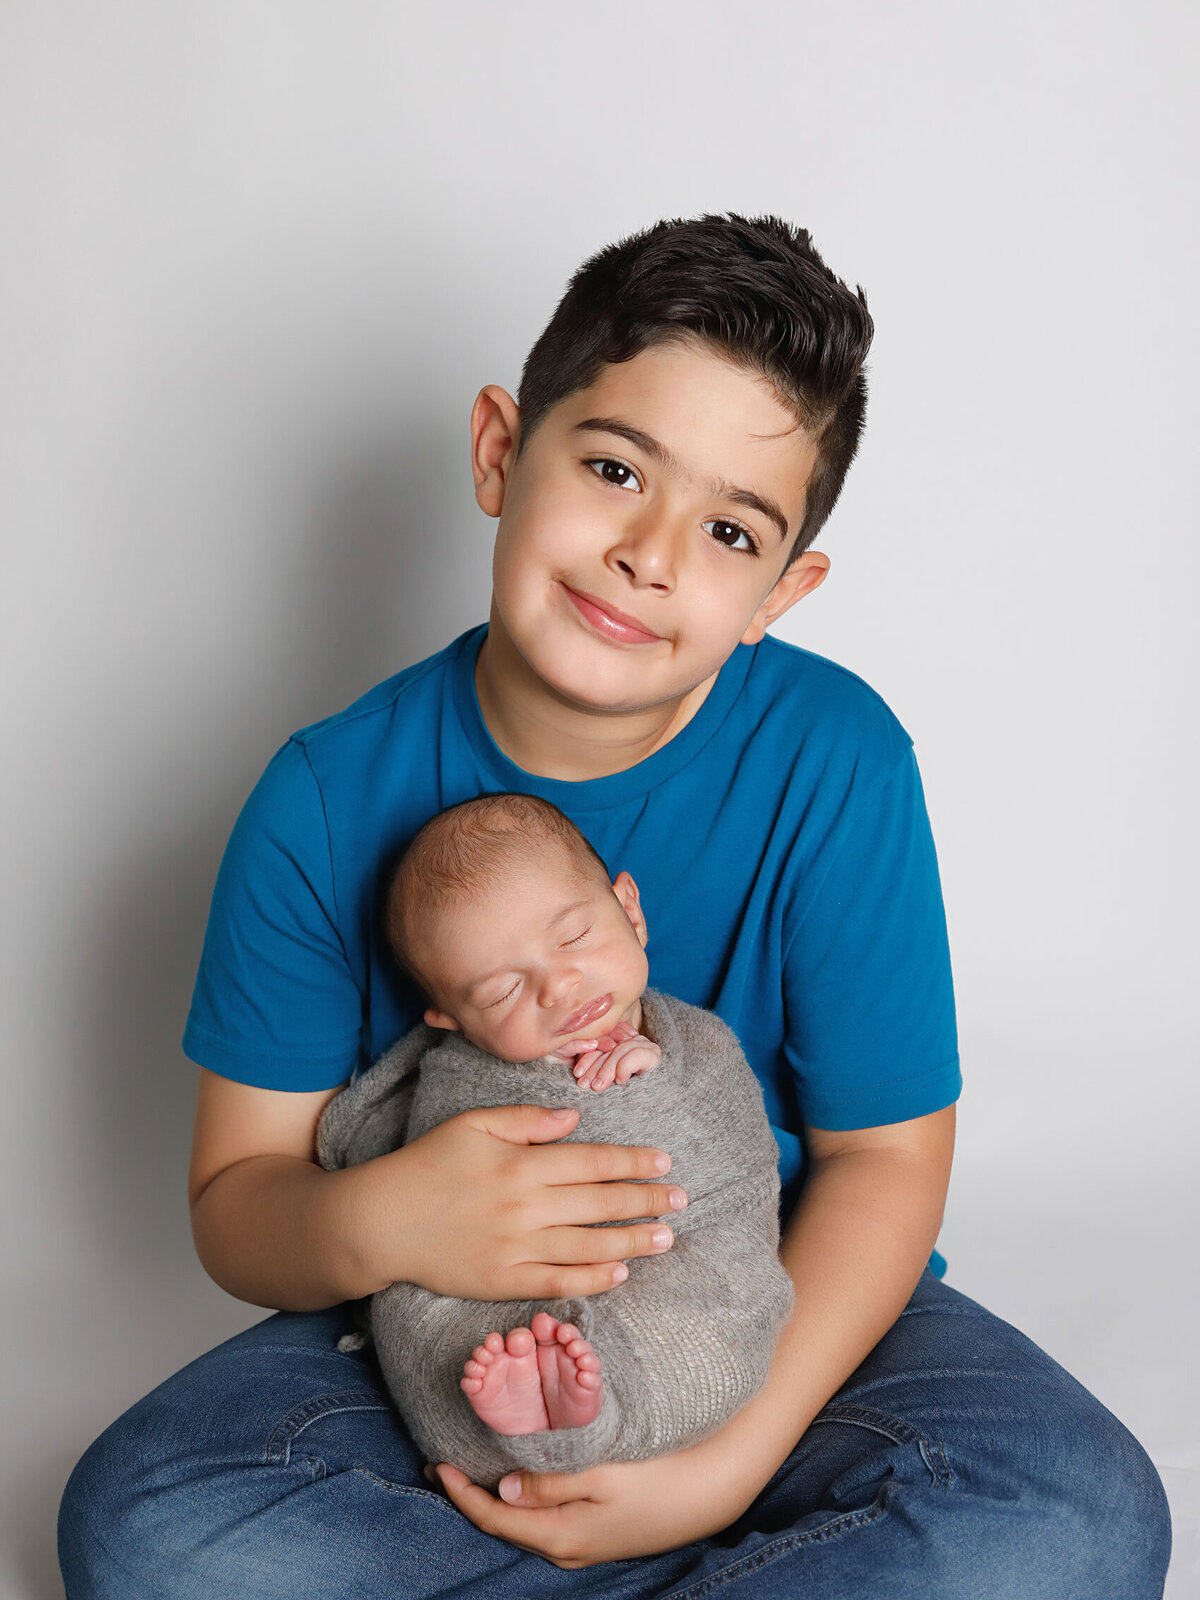 Newborn-photography-session-newborn-wrapped-up-in-brothers-arms-,-newborn-sibling-photo,-photo-taken-by-Janina-Botha-photographer-in-Oakville-Ontario